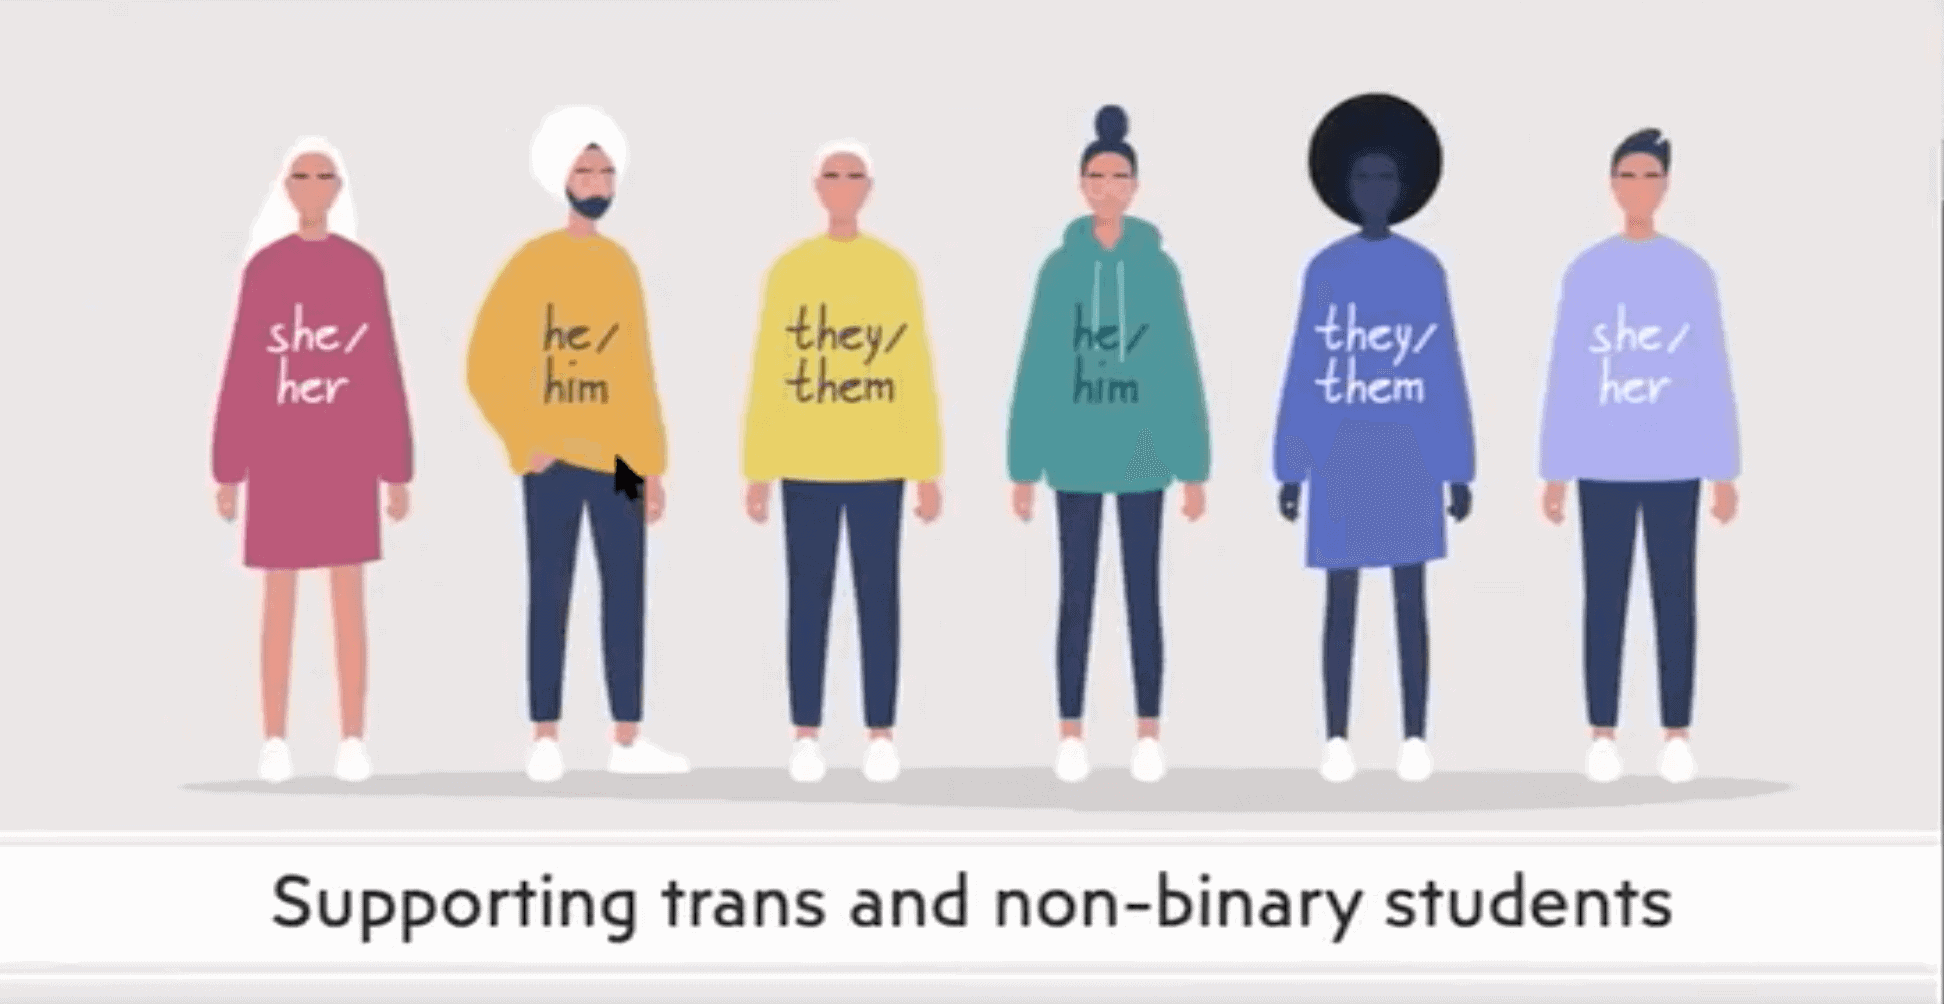 https://www.pescholar.com/wp-content/uploads/2022/01/Supporting-trans-and-non-binary-students-in-PE.png